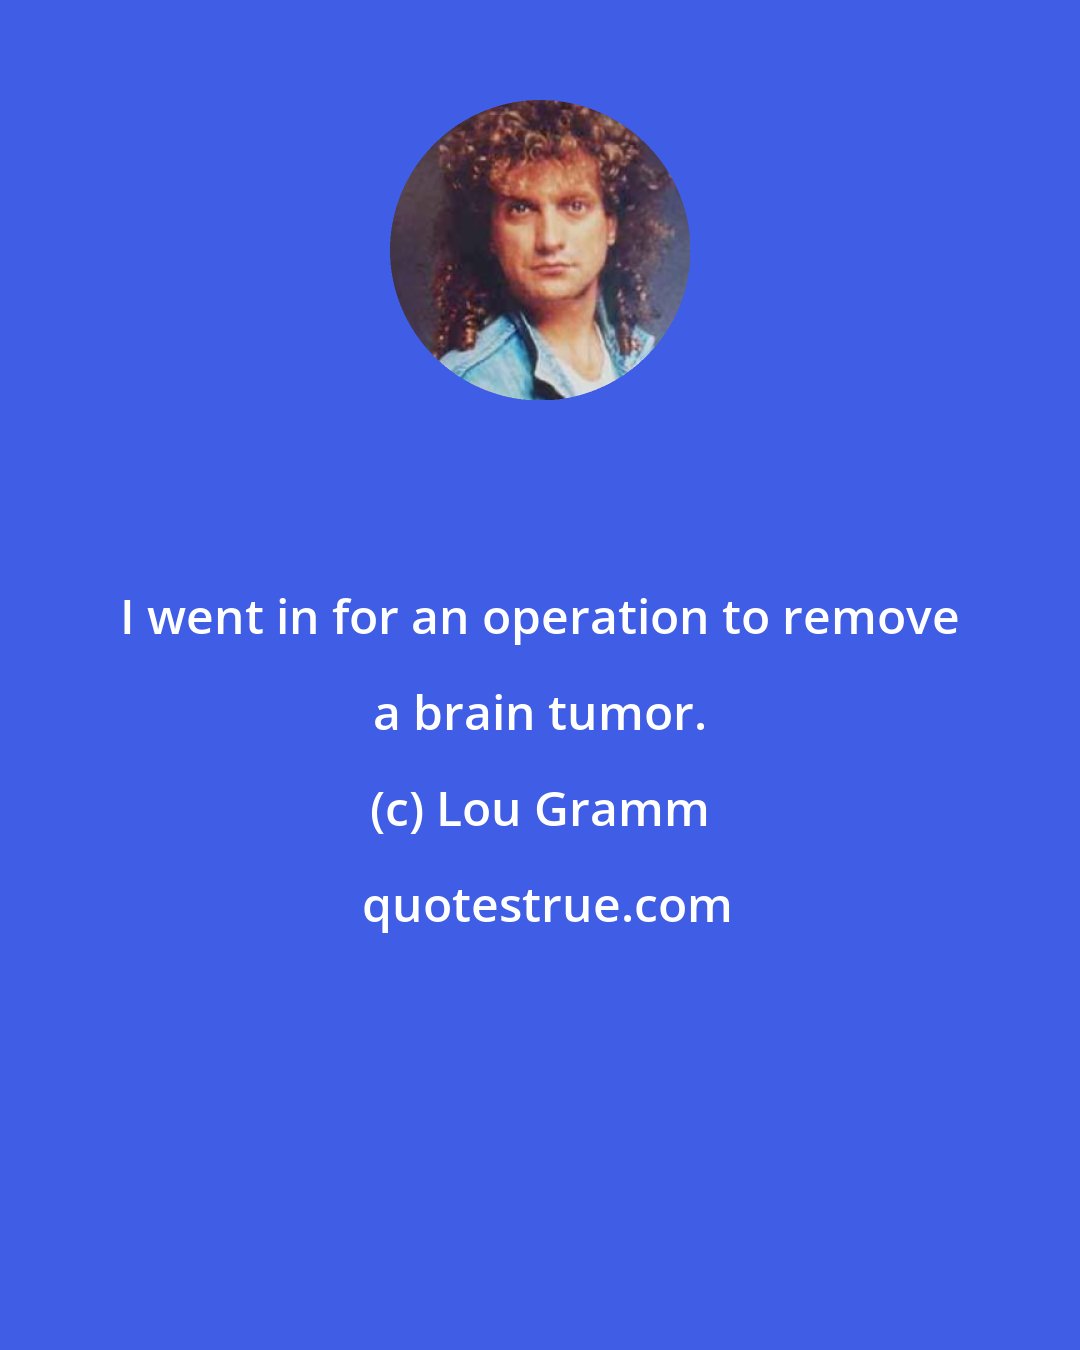 Lou Gramm: I went in for an operation to remove a brain tumor.